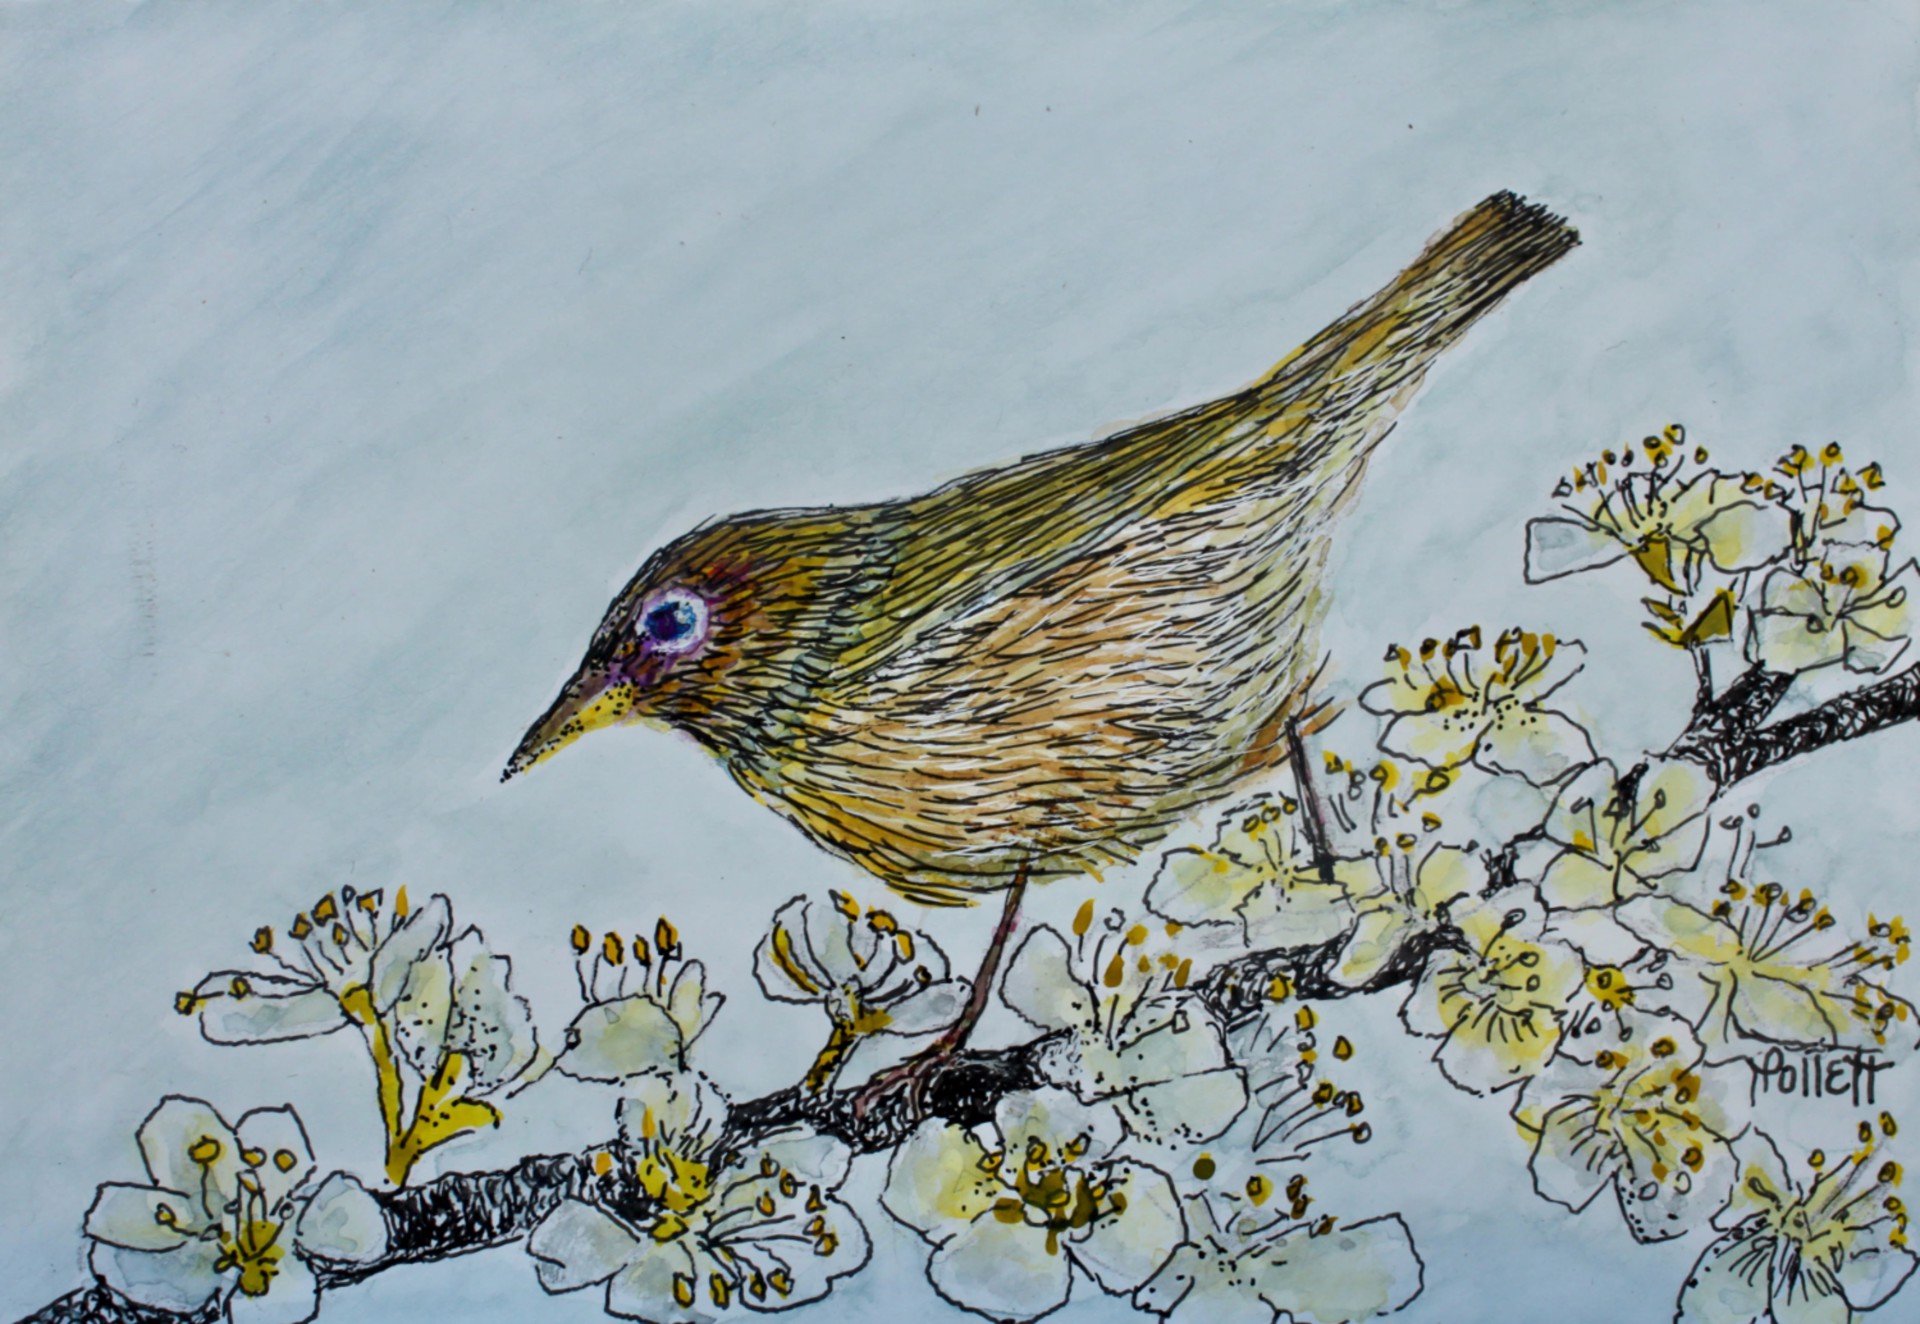 Spring Sparrow by Cynthia Jewell Pollett